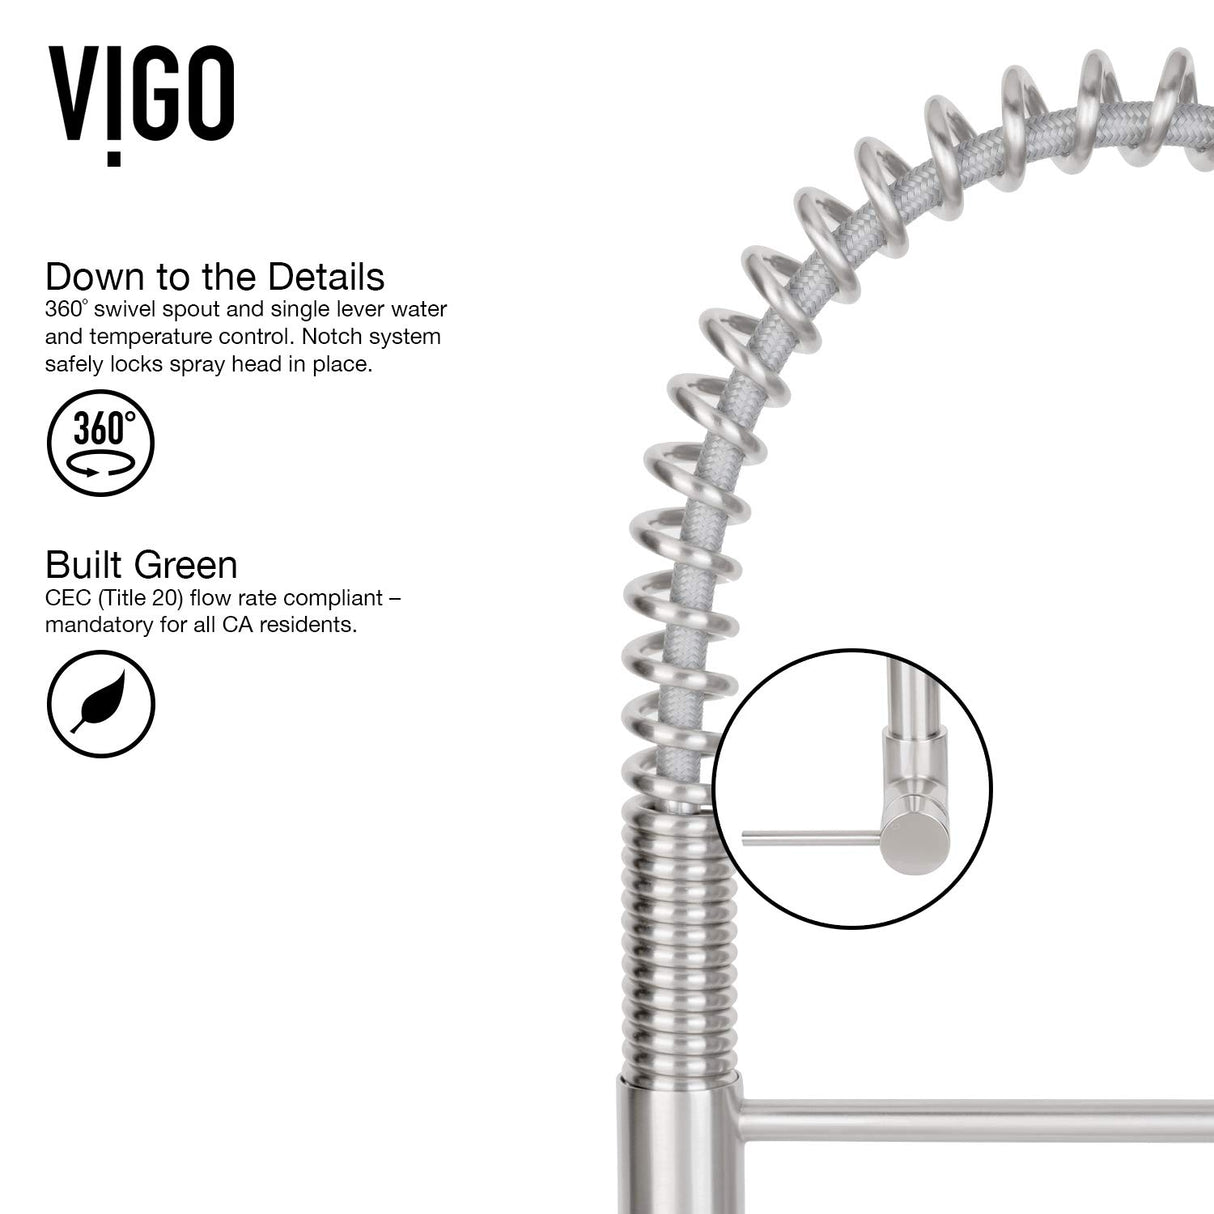 VIGO VG02032STK1 22" H Laurelton Single-Handle with Pull-Down Sprayer Kitchen Faucet with Deck Plate in Stainless Steel